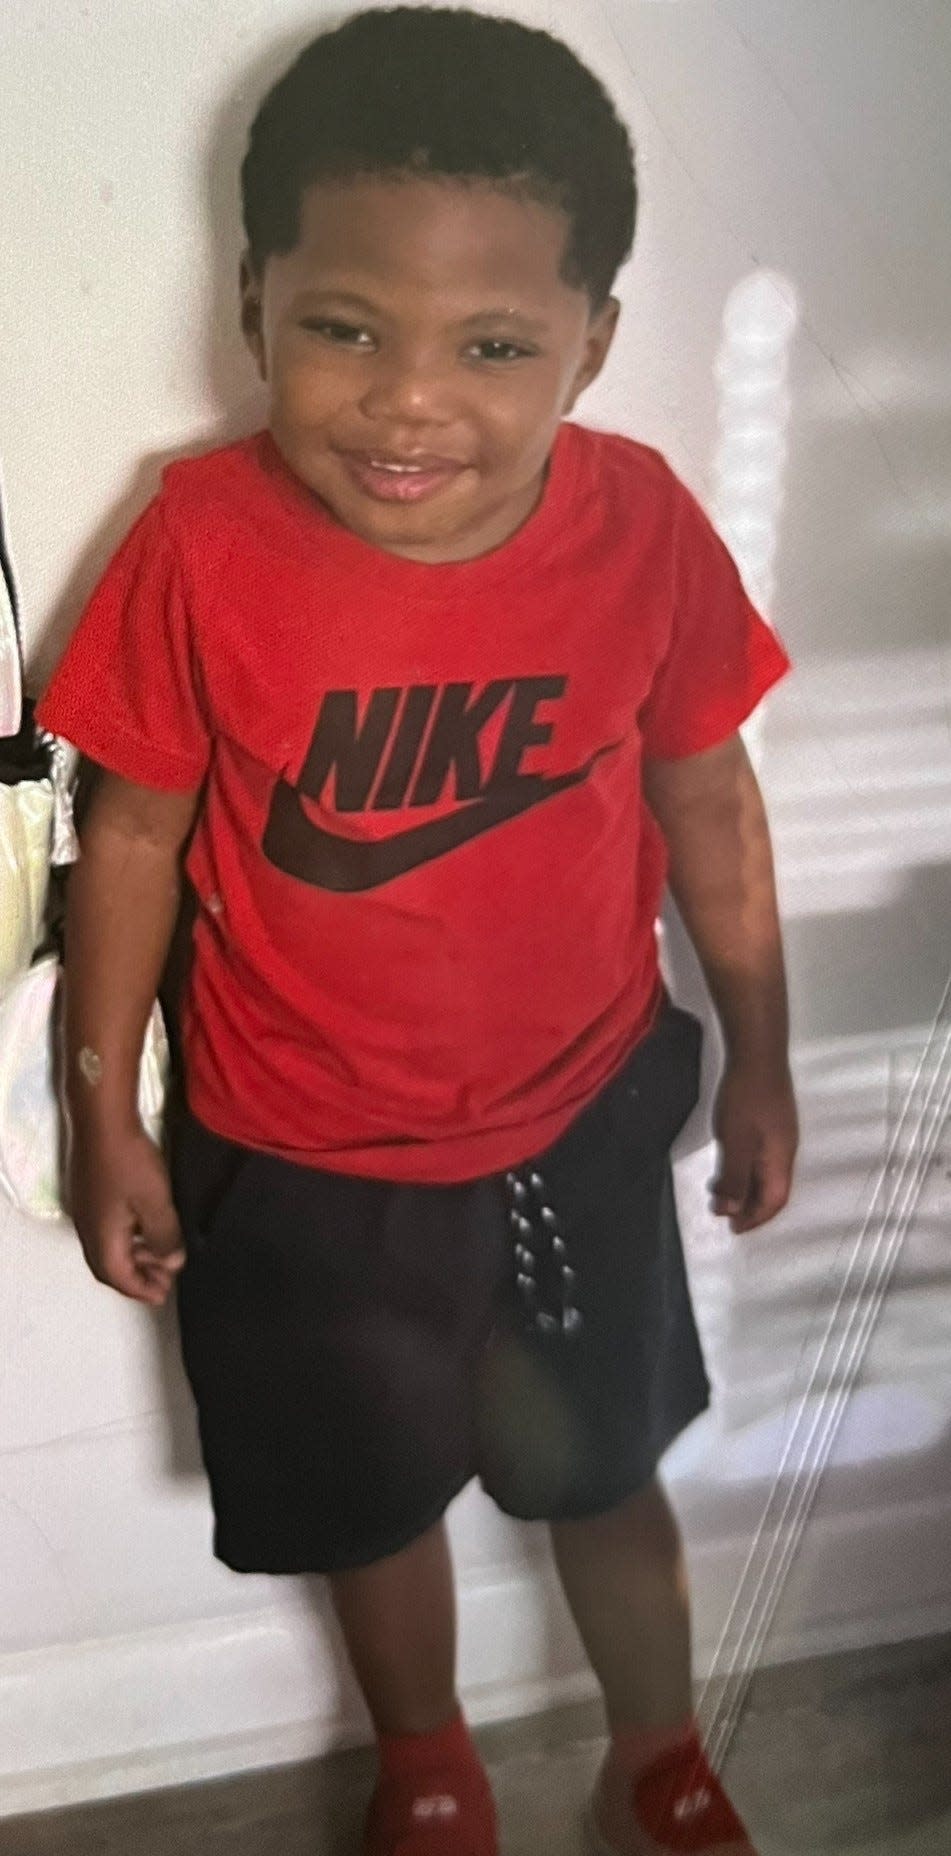 Police are searching for Darnell Taylor, a missing 5-year-old boy who is the subject of an Amber Alert issued Wednesday, Feb. 14, 2024.